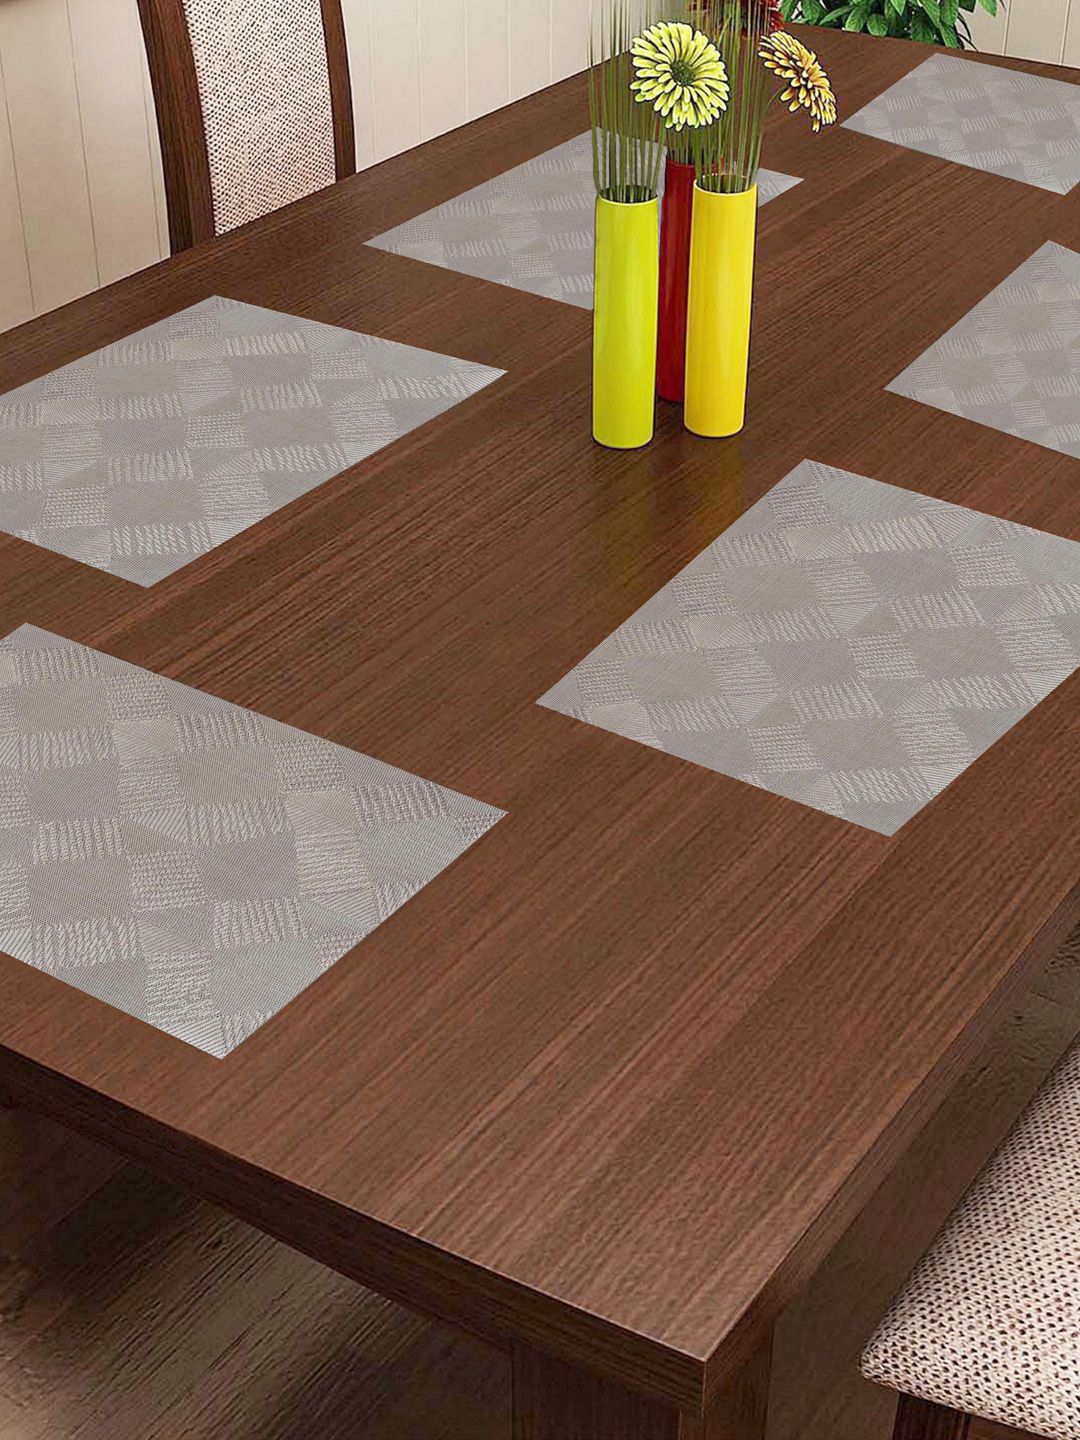 Lushomes Brown Pack of 6 Jacquard Waterproof Table Mats Price in India